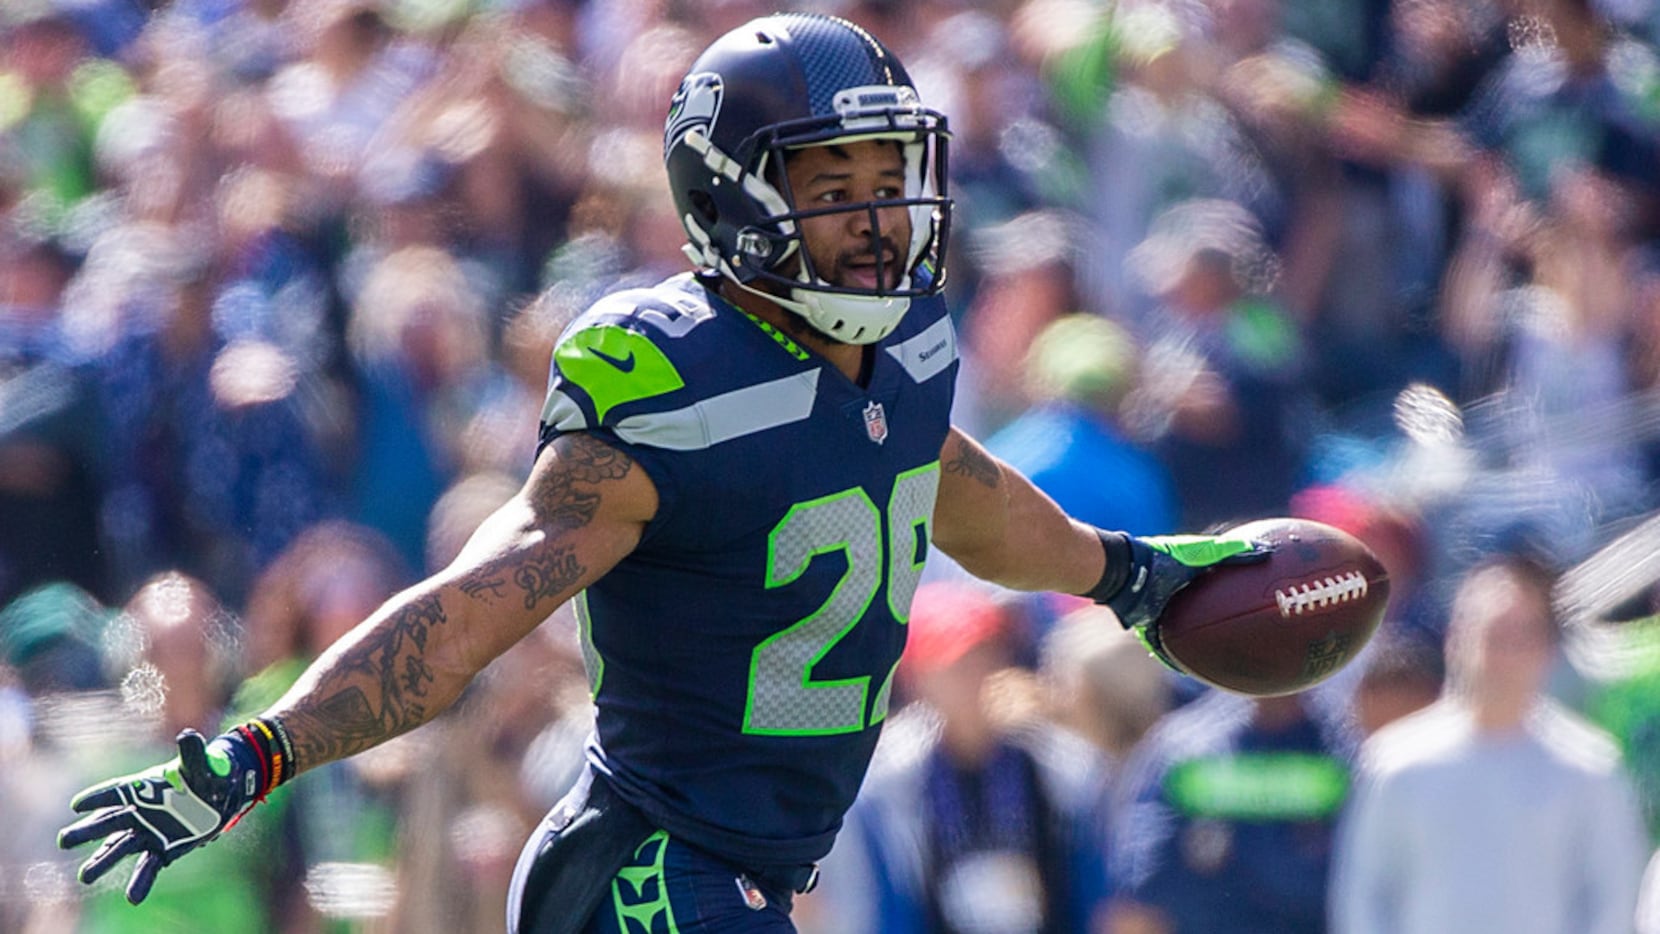 What Seahawks safety Earl Thomas said about Cowboys coaches asking 'You  ready for the trade tomorrow?'